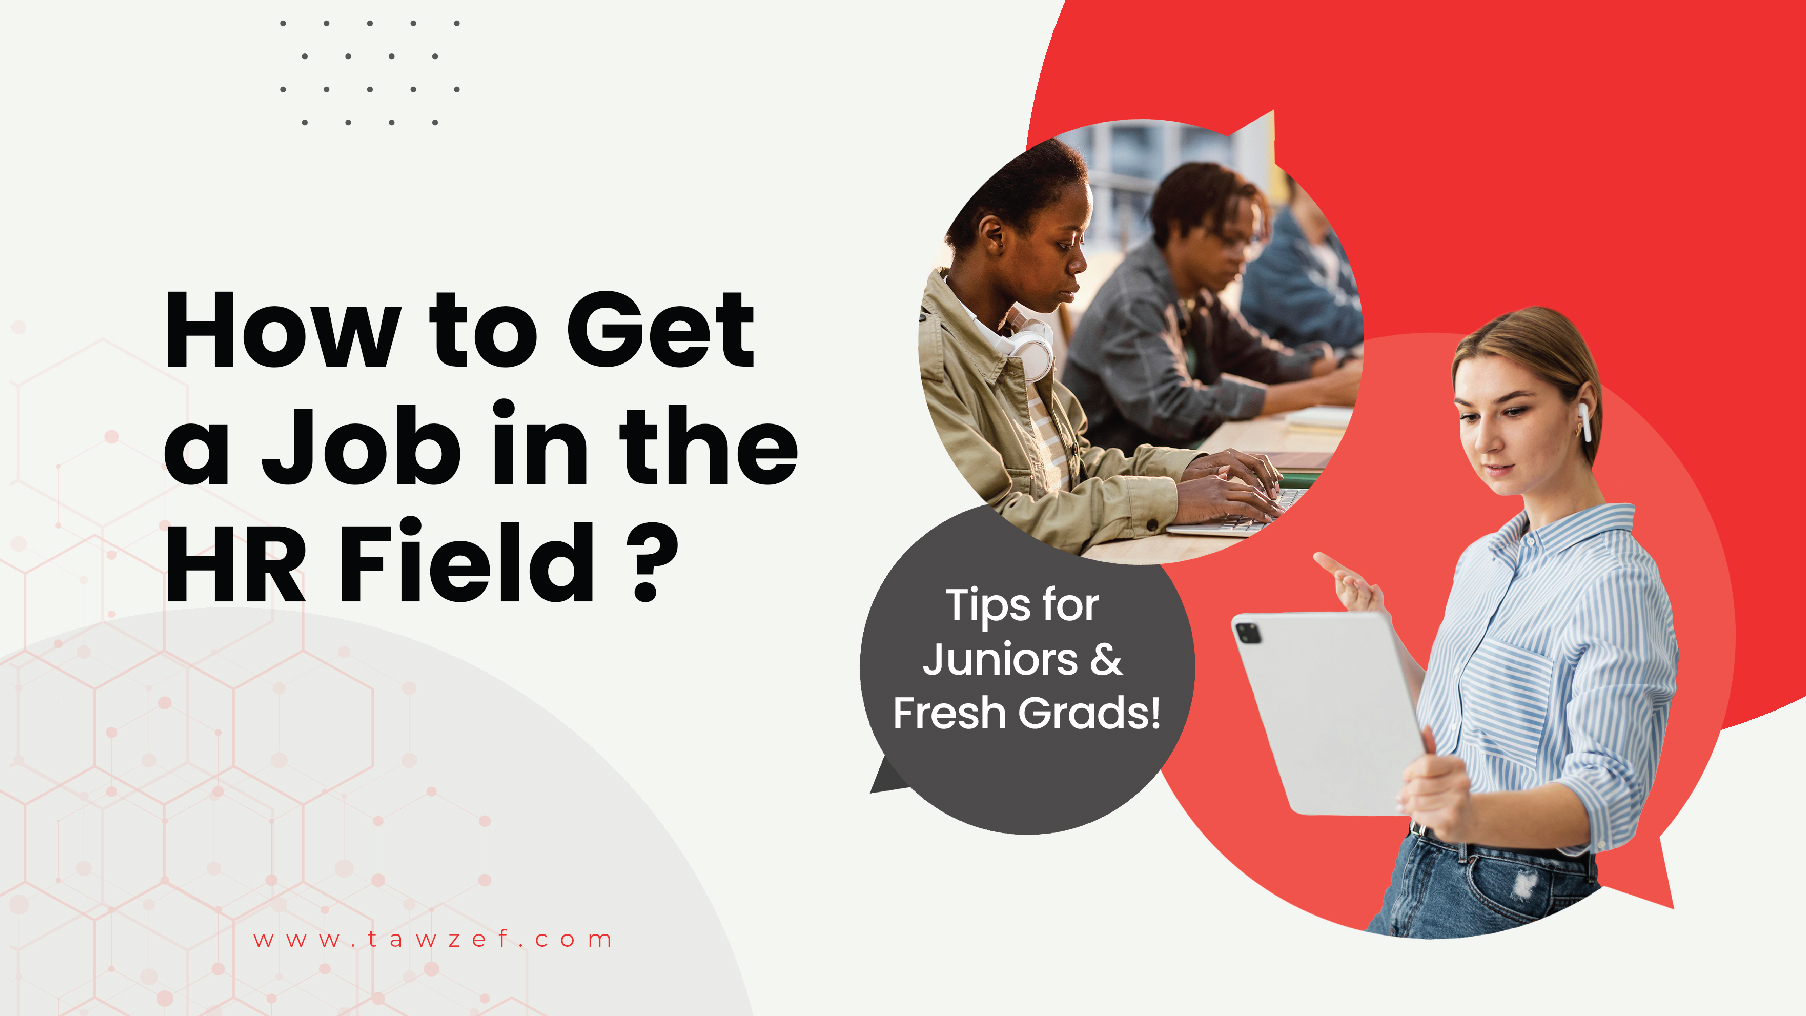 How to Get a Job in the HR Field? Tips for Juniors & Fresh Grads